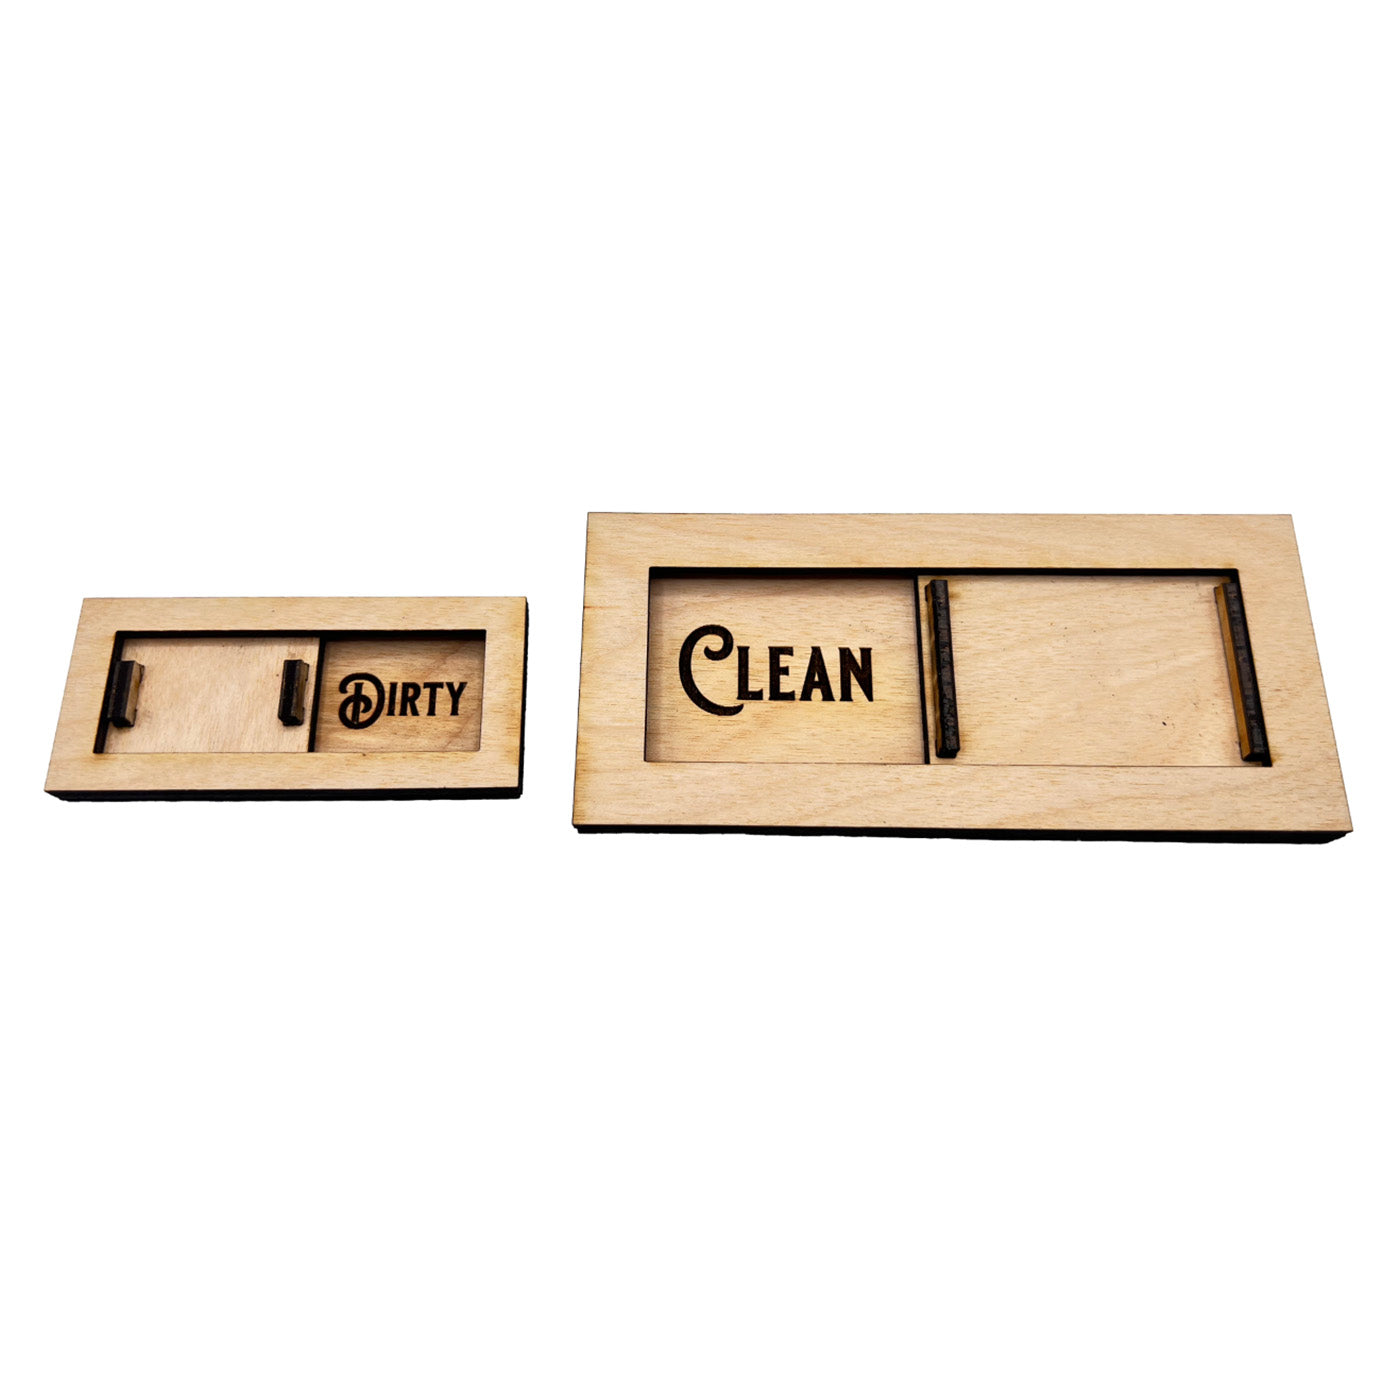 Customizable Clean / Dirty Sliders for Dishwasher / Washing Machine (Large and Small)